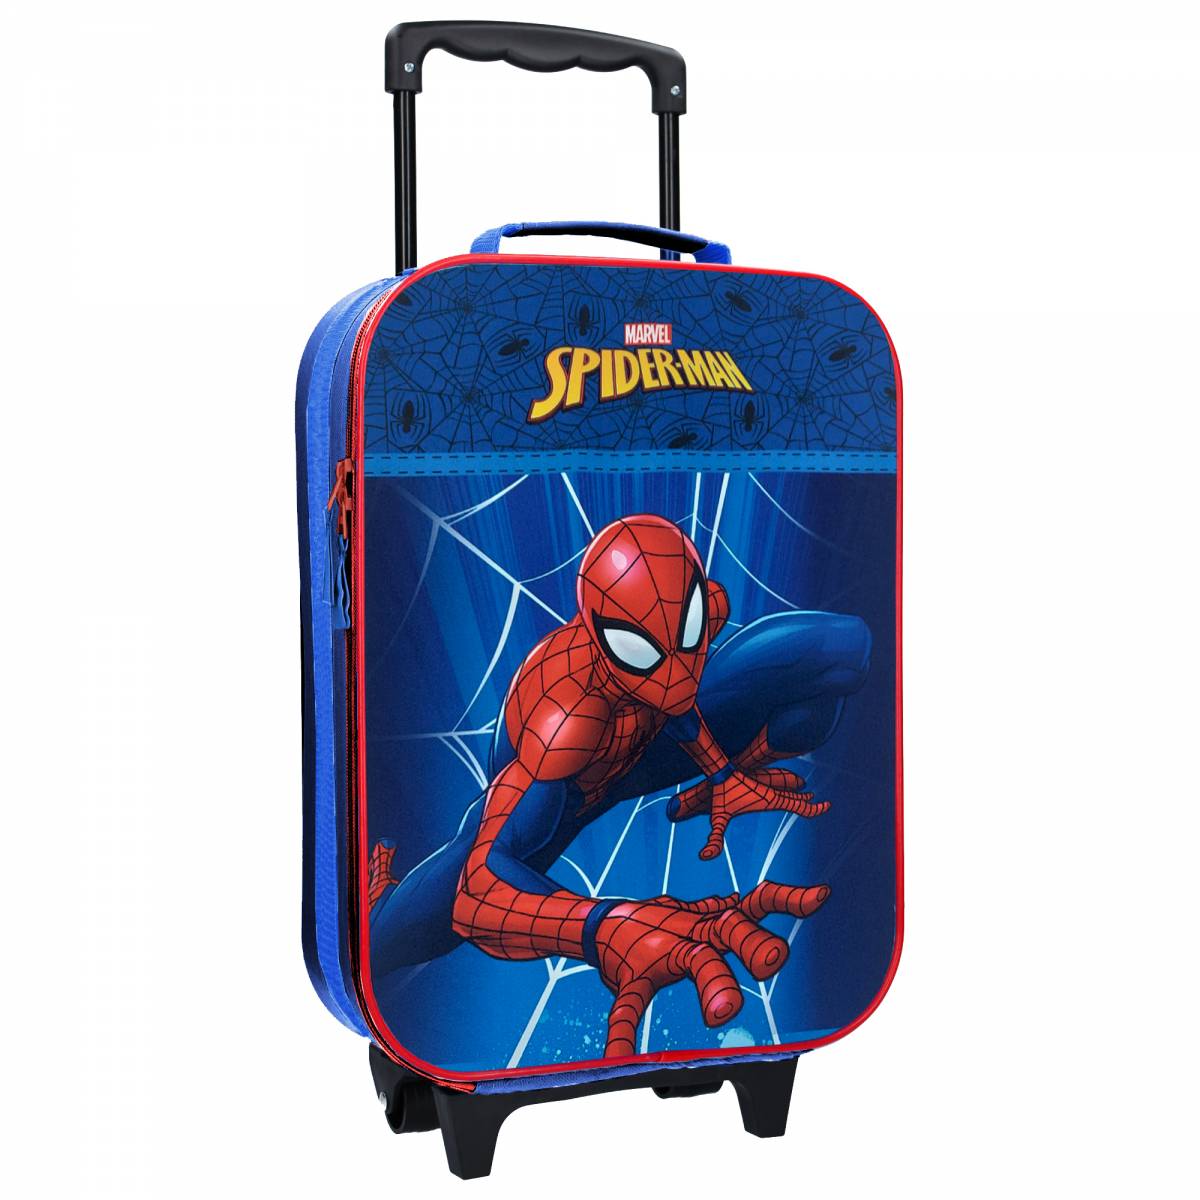 Trolley suitcase Spider-Man Of Show The Star